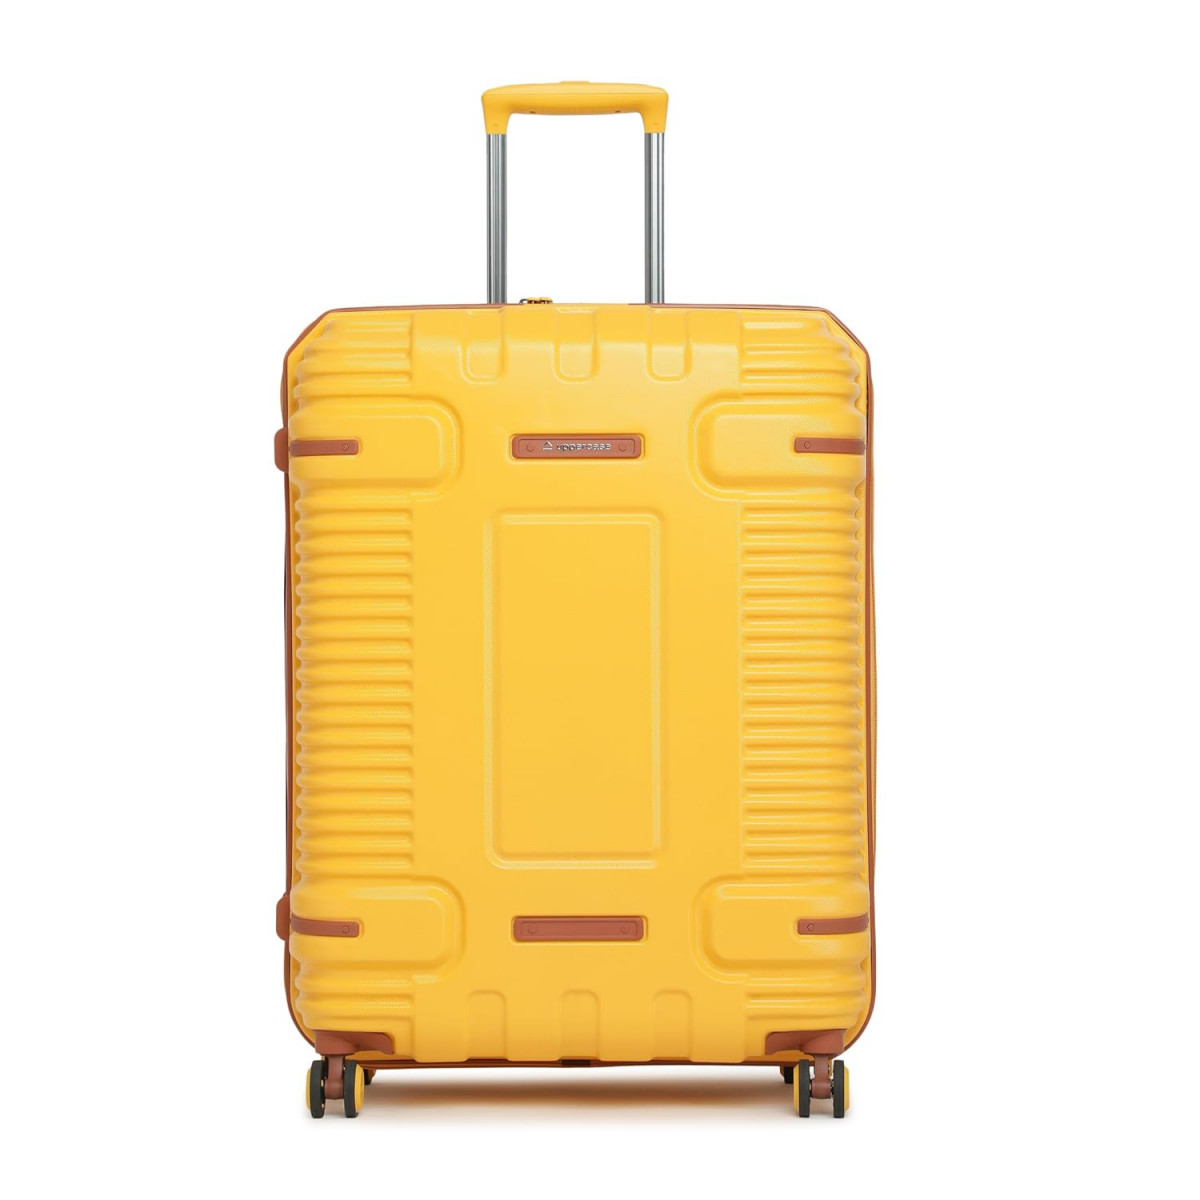 uppercase Ridge Trolley Bag Set Of 3 SML Hardsided Polycarbonate Cabin  Check-In Luggage 8 Wheel Suitcase Tsa Lock  Anti Theft Zippers 2000 Days Warranty Yellow 32 X 54 X 74 Cm Spinner